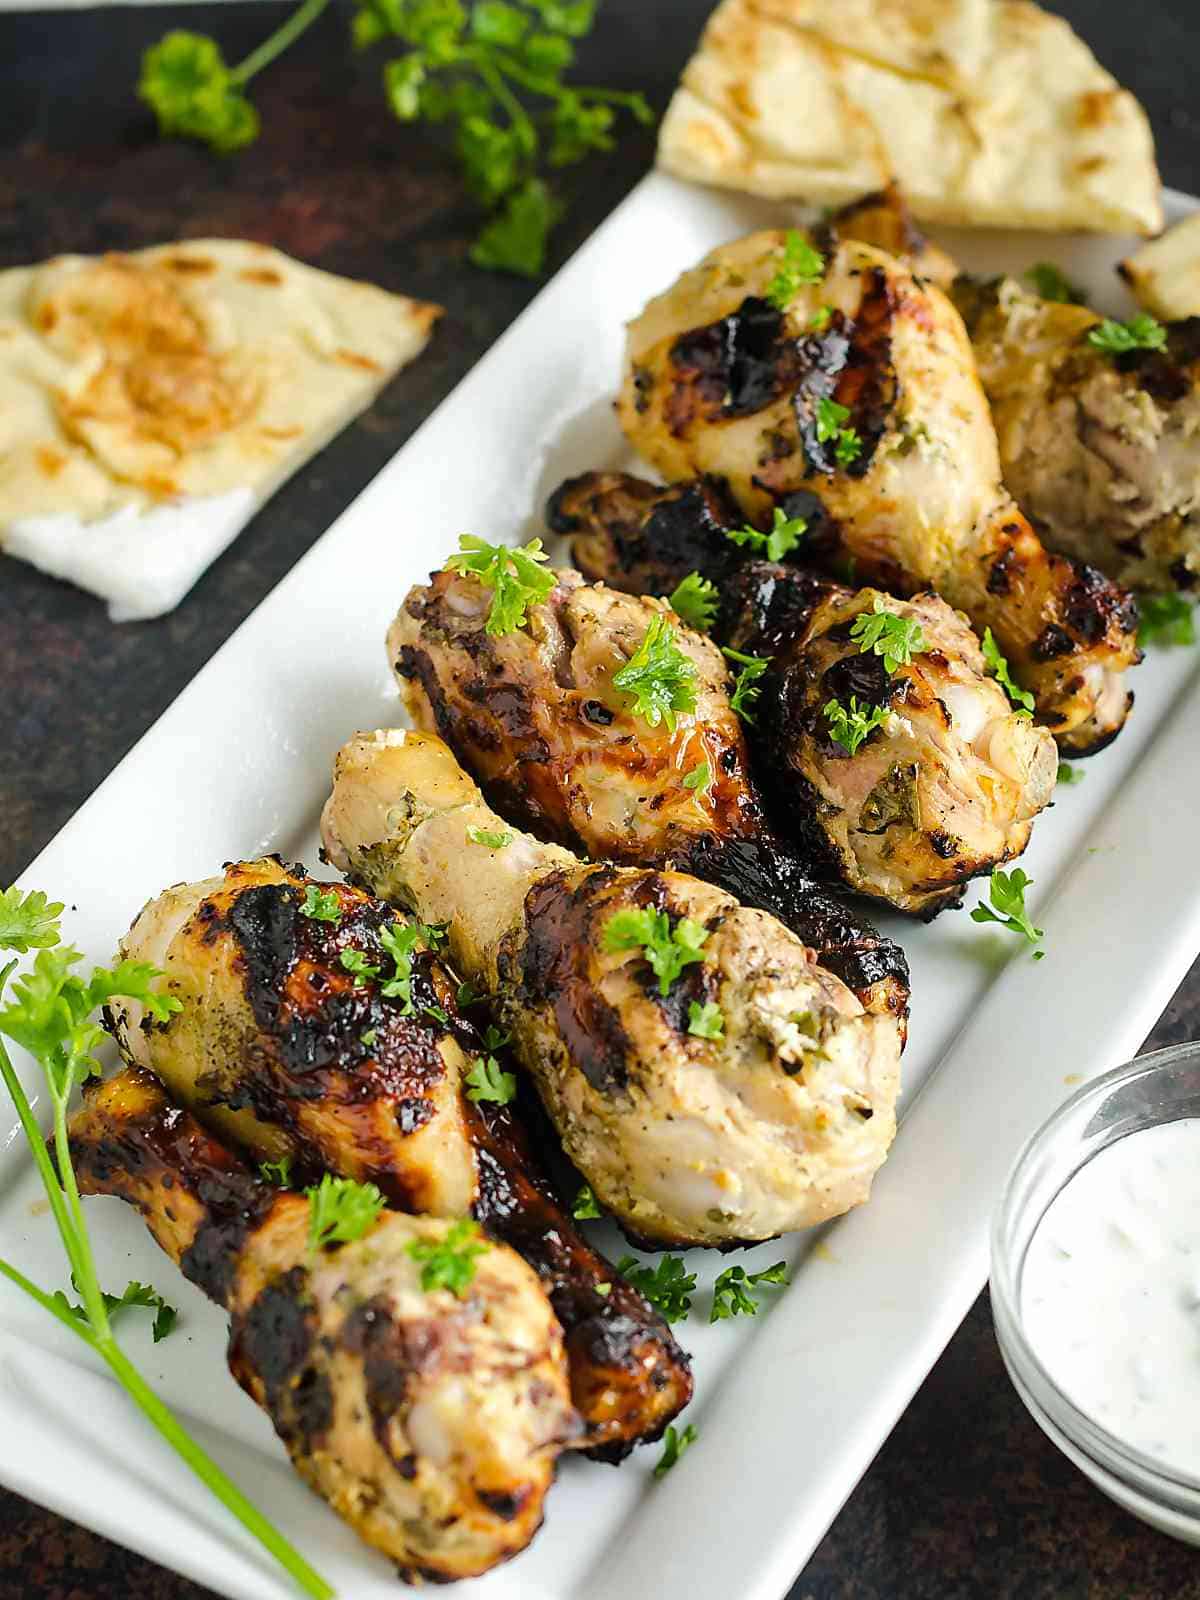 platter of grilled chicken drumsticks  that were marinated in a yogurt sauce, garnished with parsley.